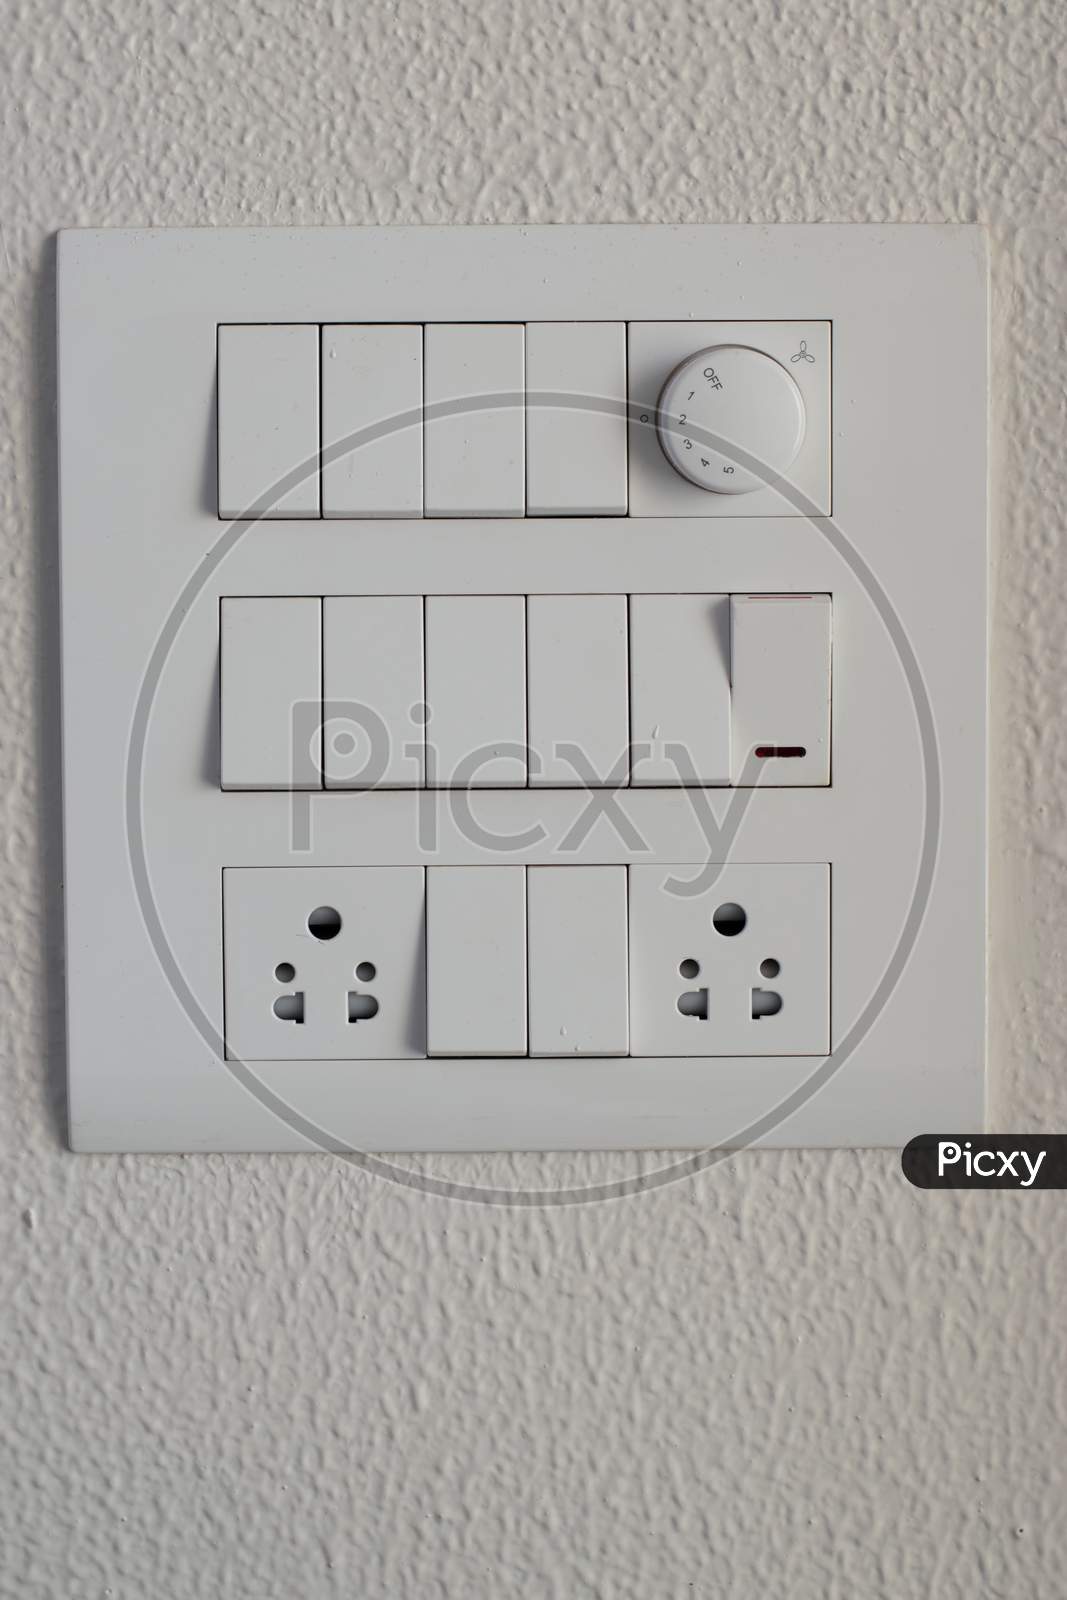 Designer Electrical White Switch Board With Regulator And Switches And Three Pin Sockets On The White Wall